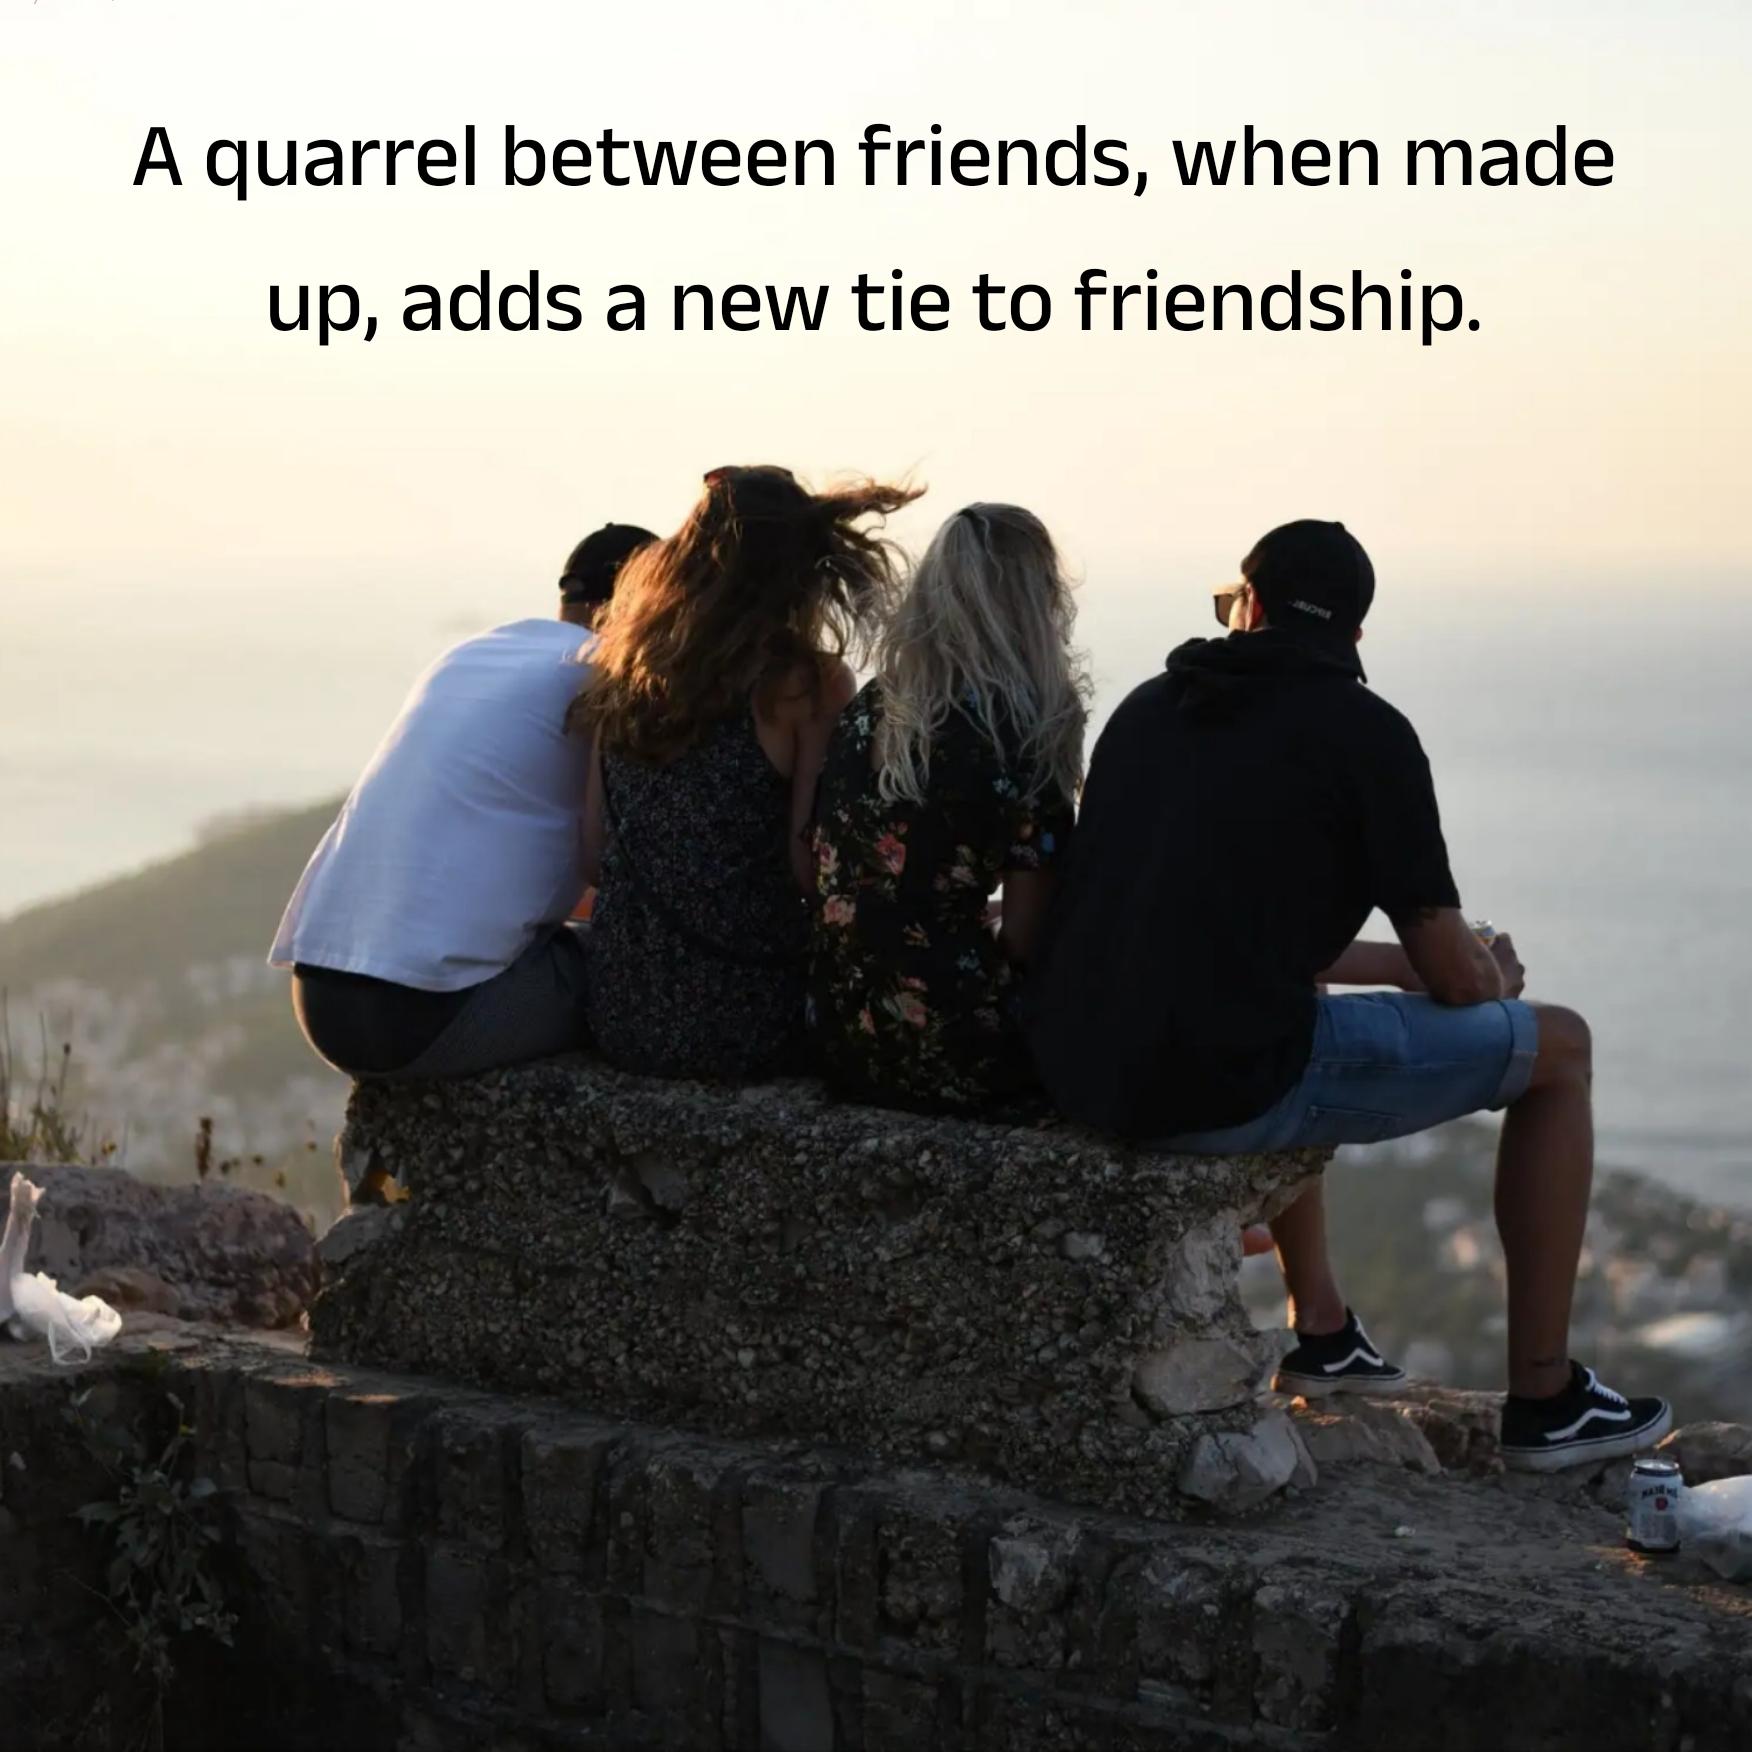 A quarrel between friends when made up adds a new tie to friendship